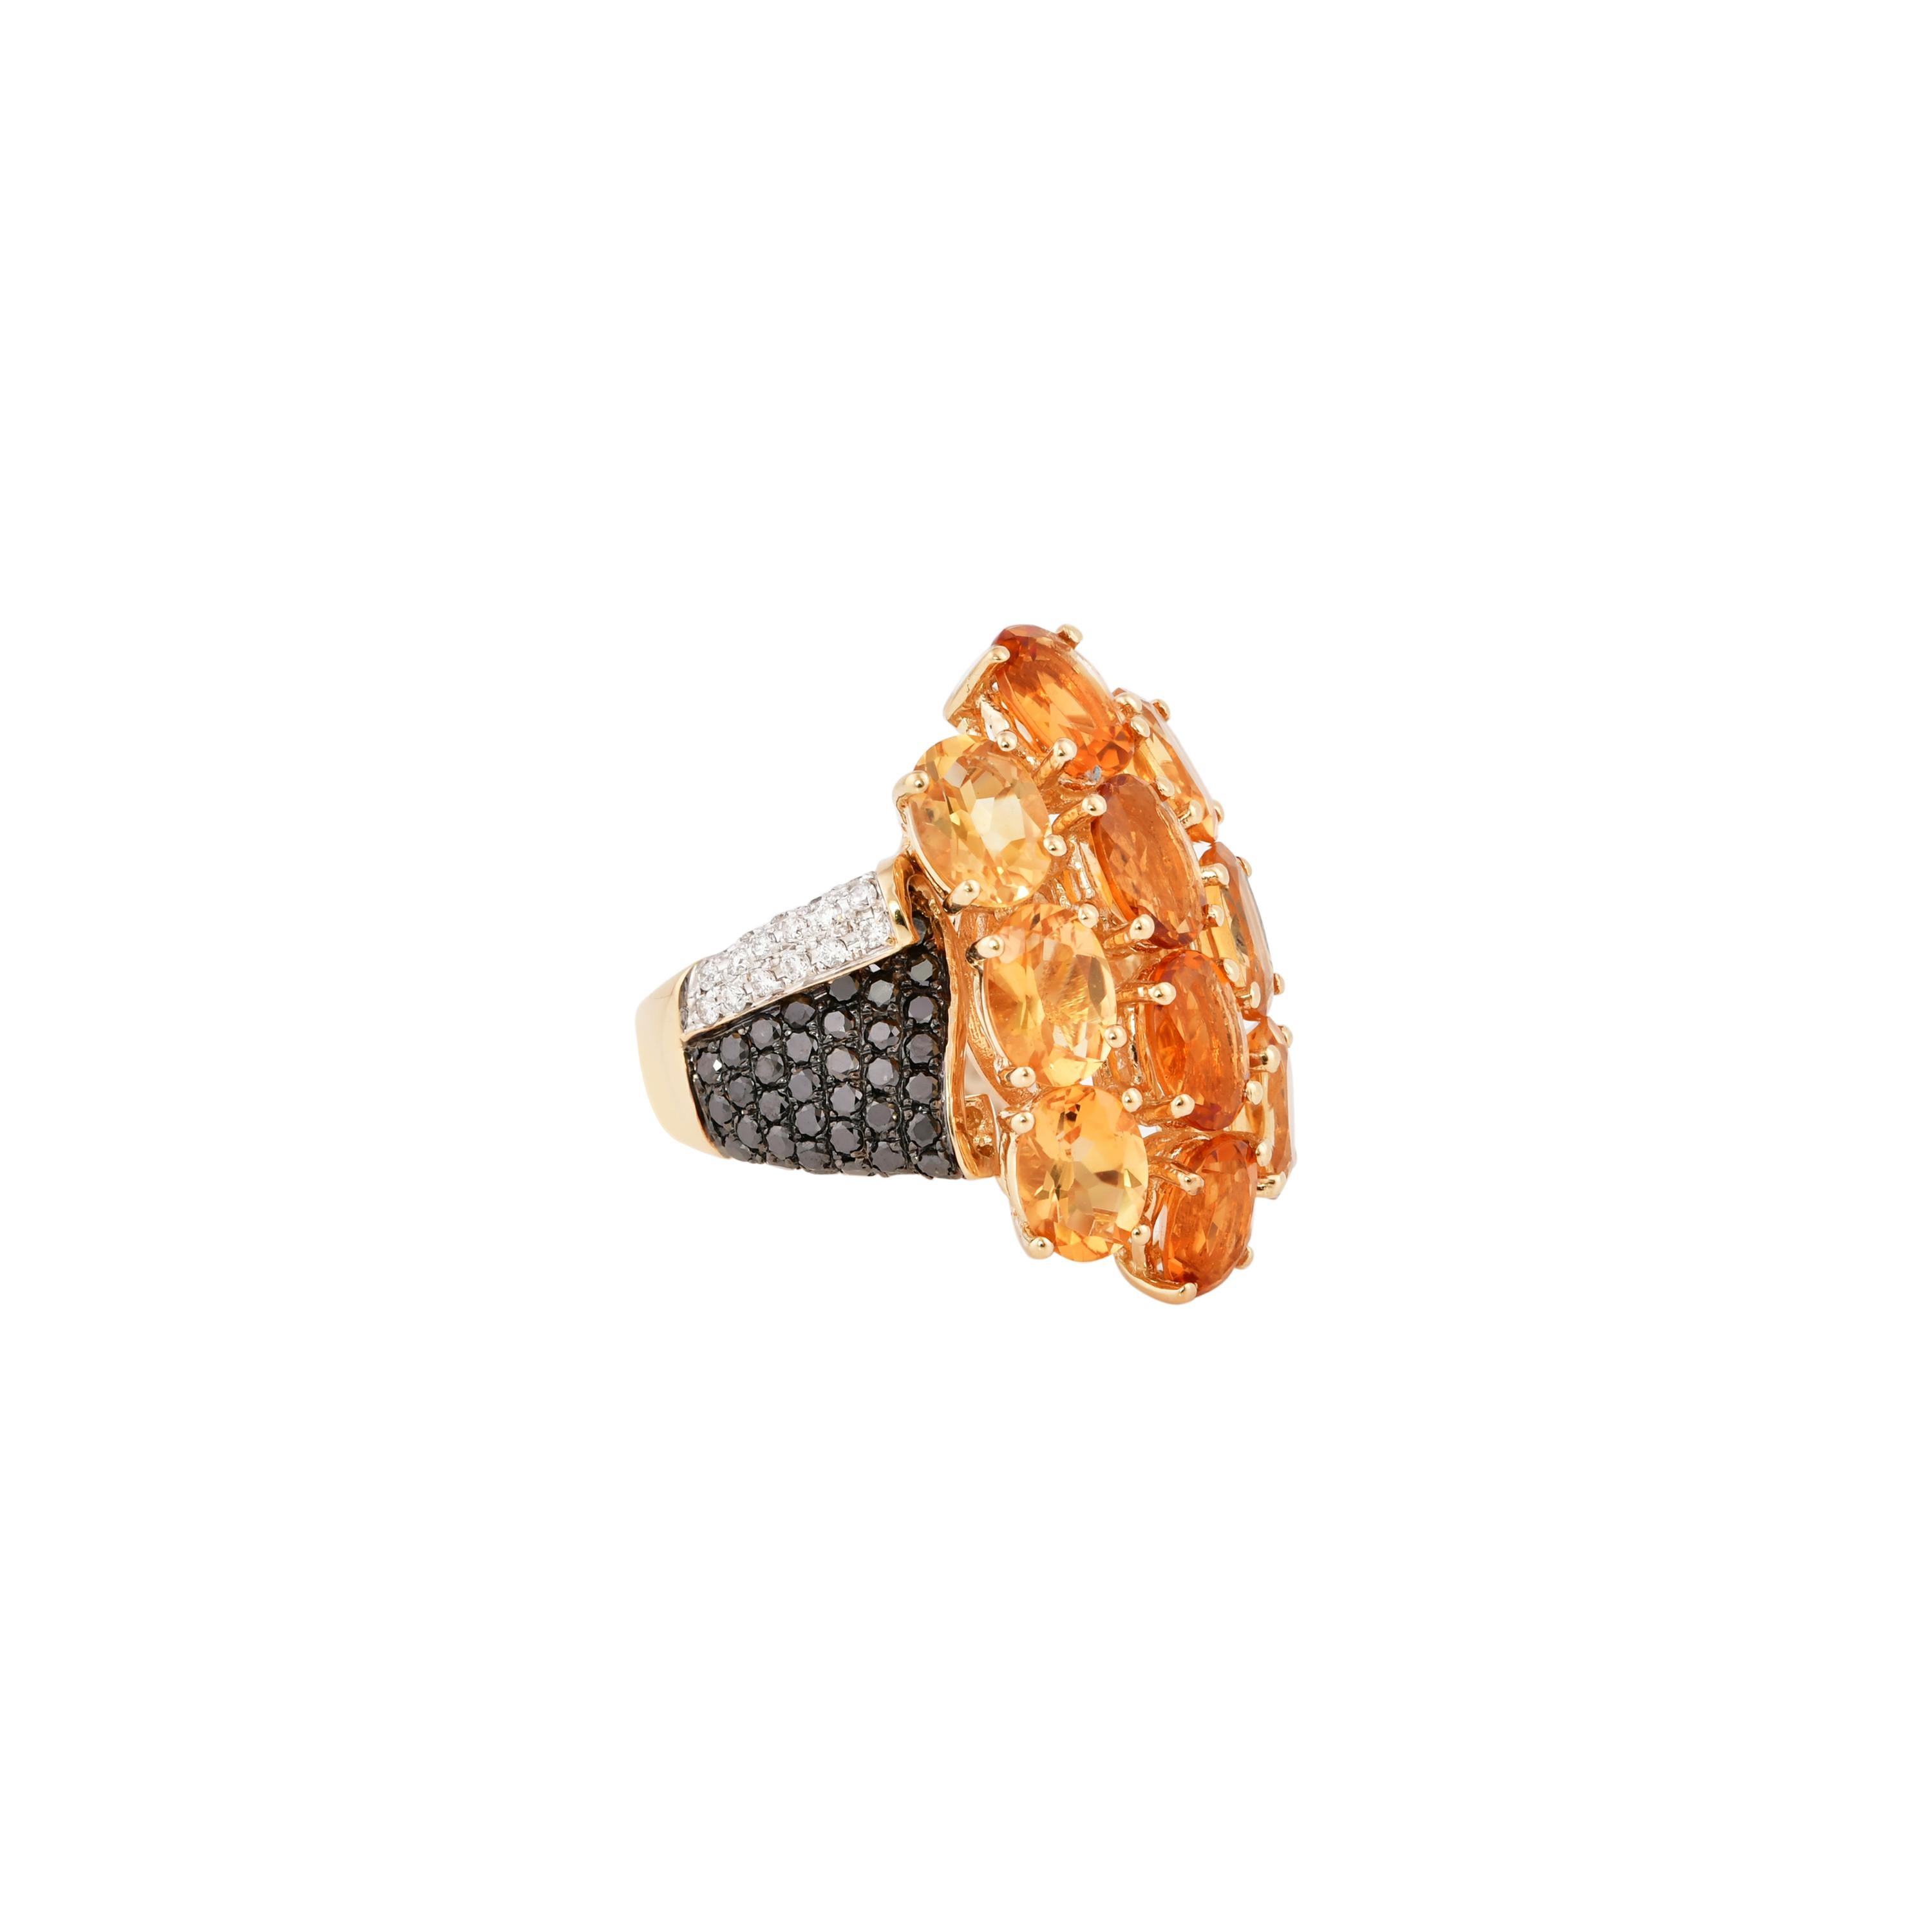 Glamorous Gemstones - Sunita Nahata started off her career as a gemstone trader, and this particular collection reflects her love for multi-colored semi-precious gemstones. This ring presents a cluster of the most vibrant citrines with a summery